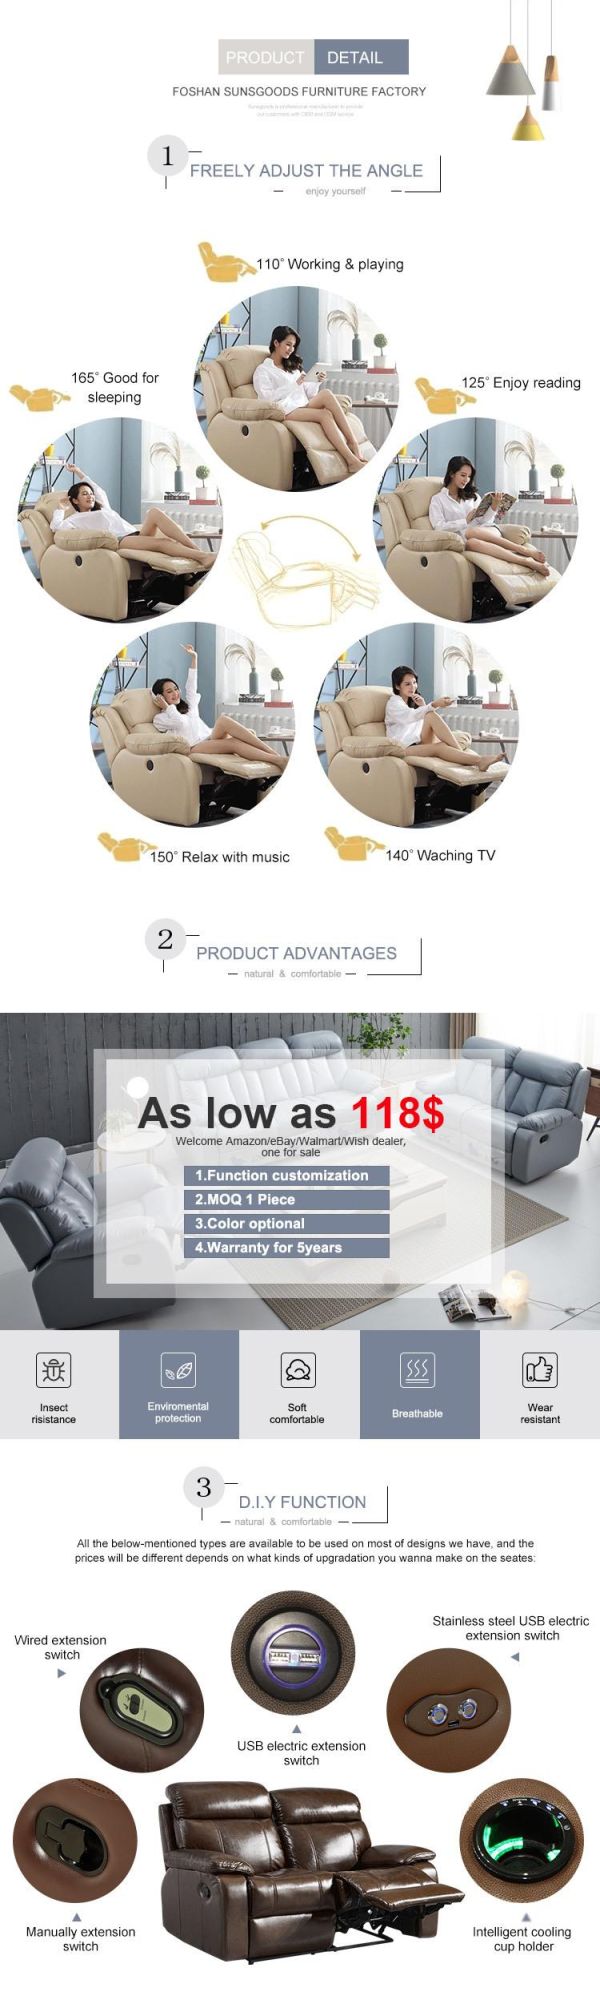 High Quality Fabric Best Manual Recliner Swivel Chair for Sales